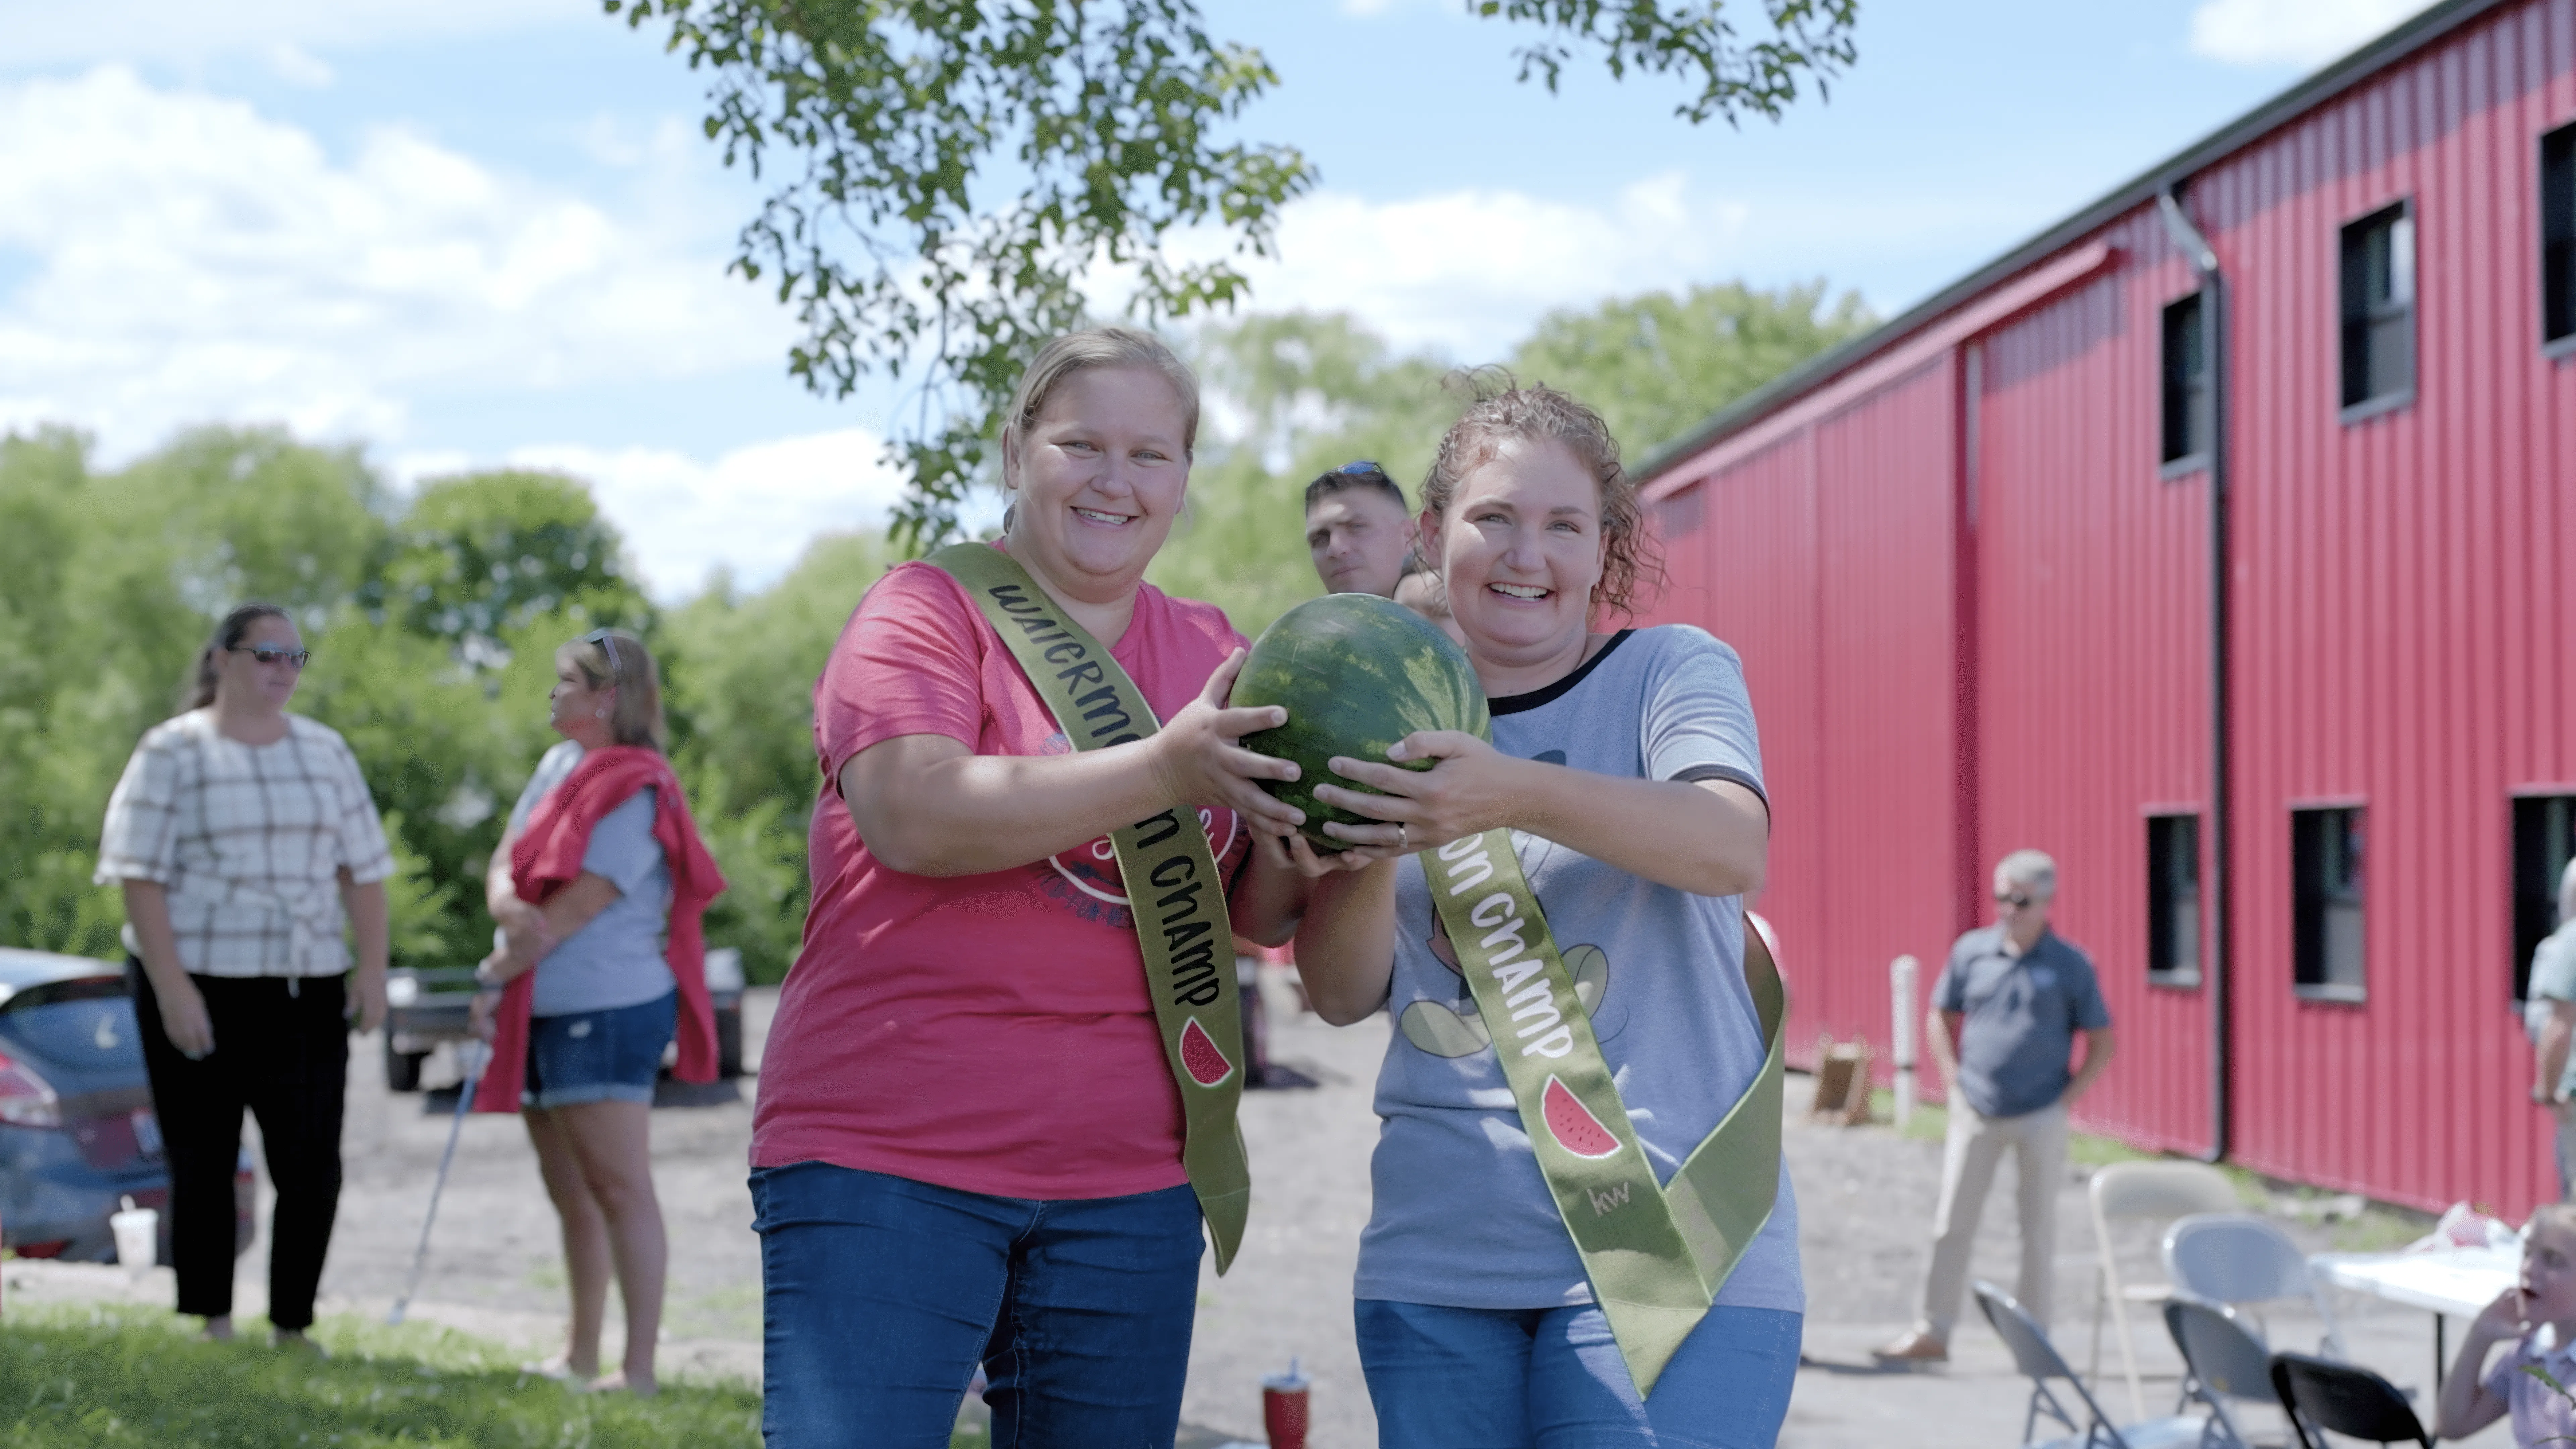 Two people holding a large watermelon with smiles, at an outdoor event with others in the background.